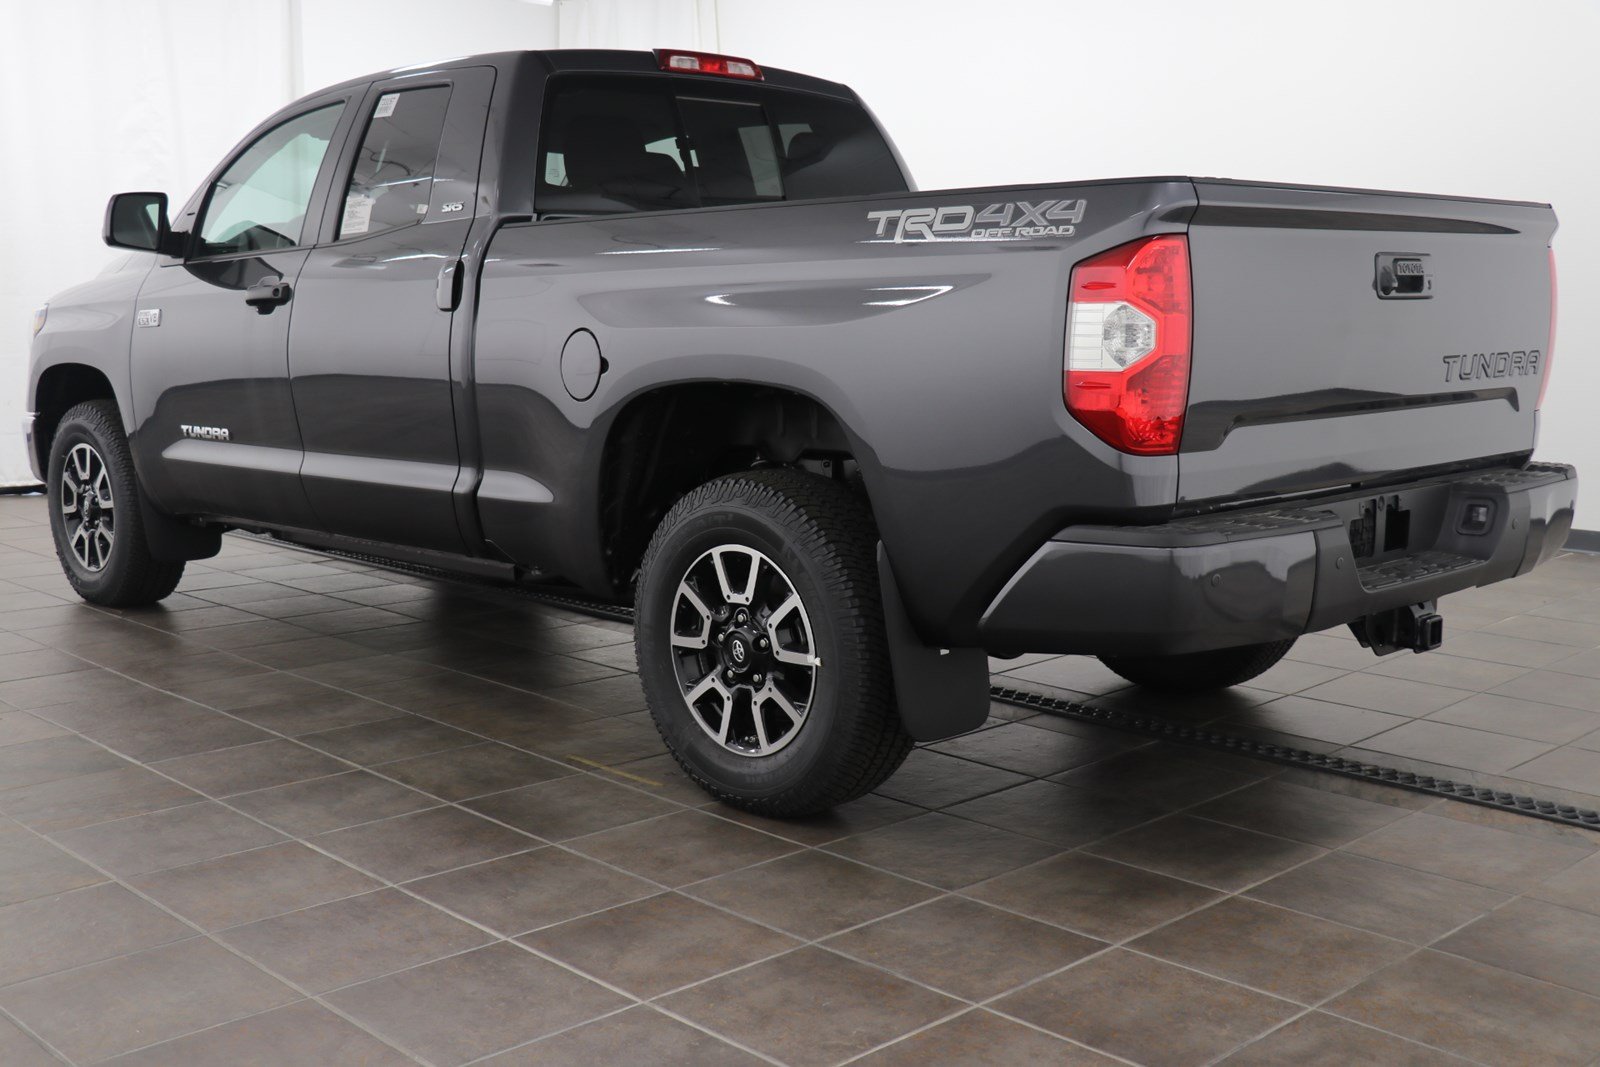 New 2019 Toyota Tundra 4WD SR5 Double Cab Double Cab in Elmhurst #